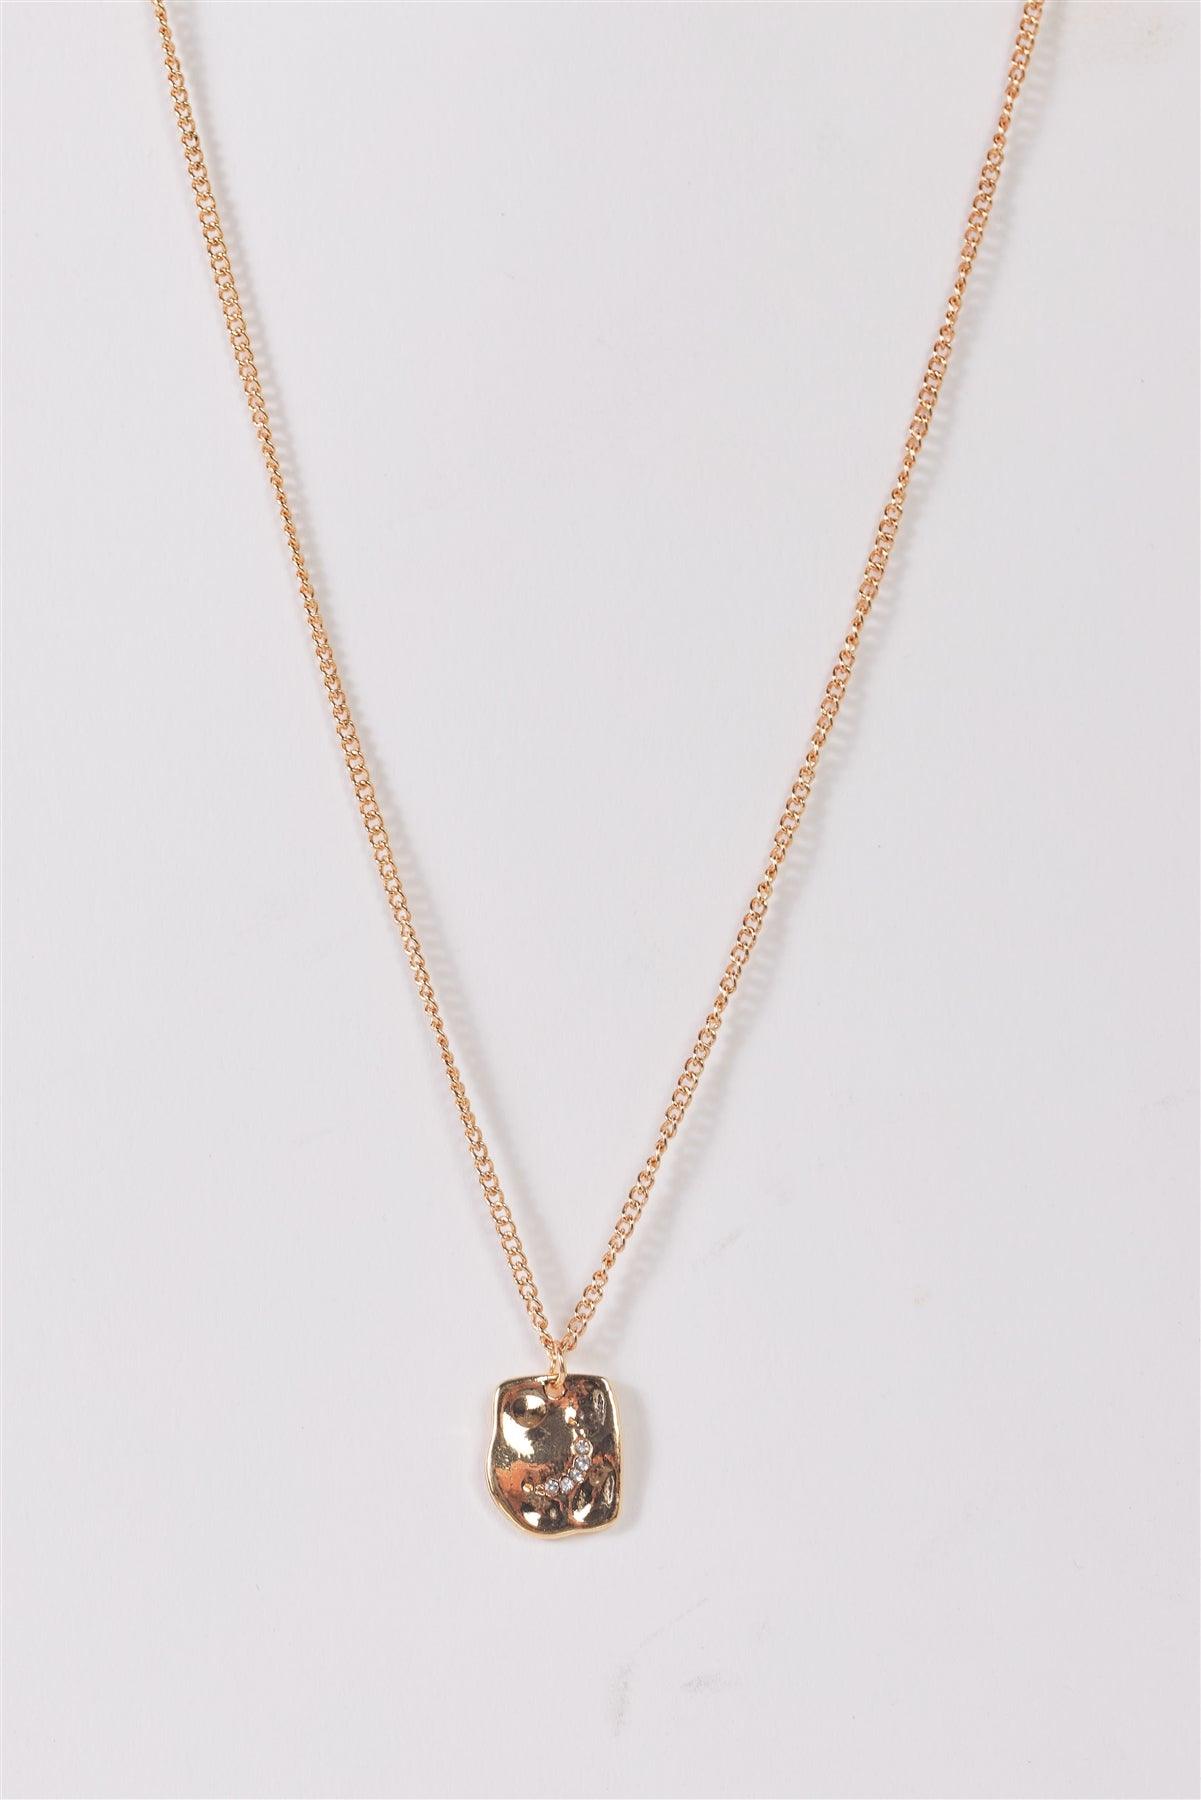 Gold Link Chain With Asymmetrical Textured Rectangle & Faux Crystals Moon Pendant Necklace /3 Pieces